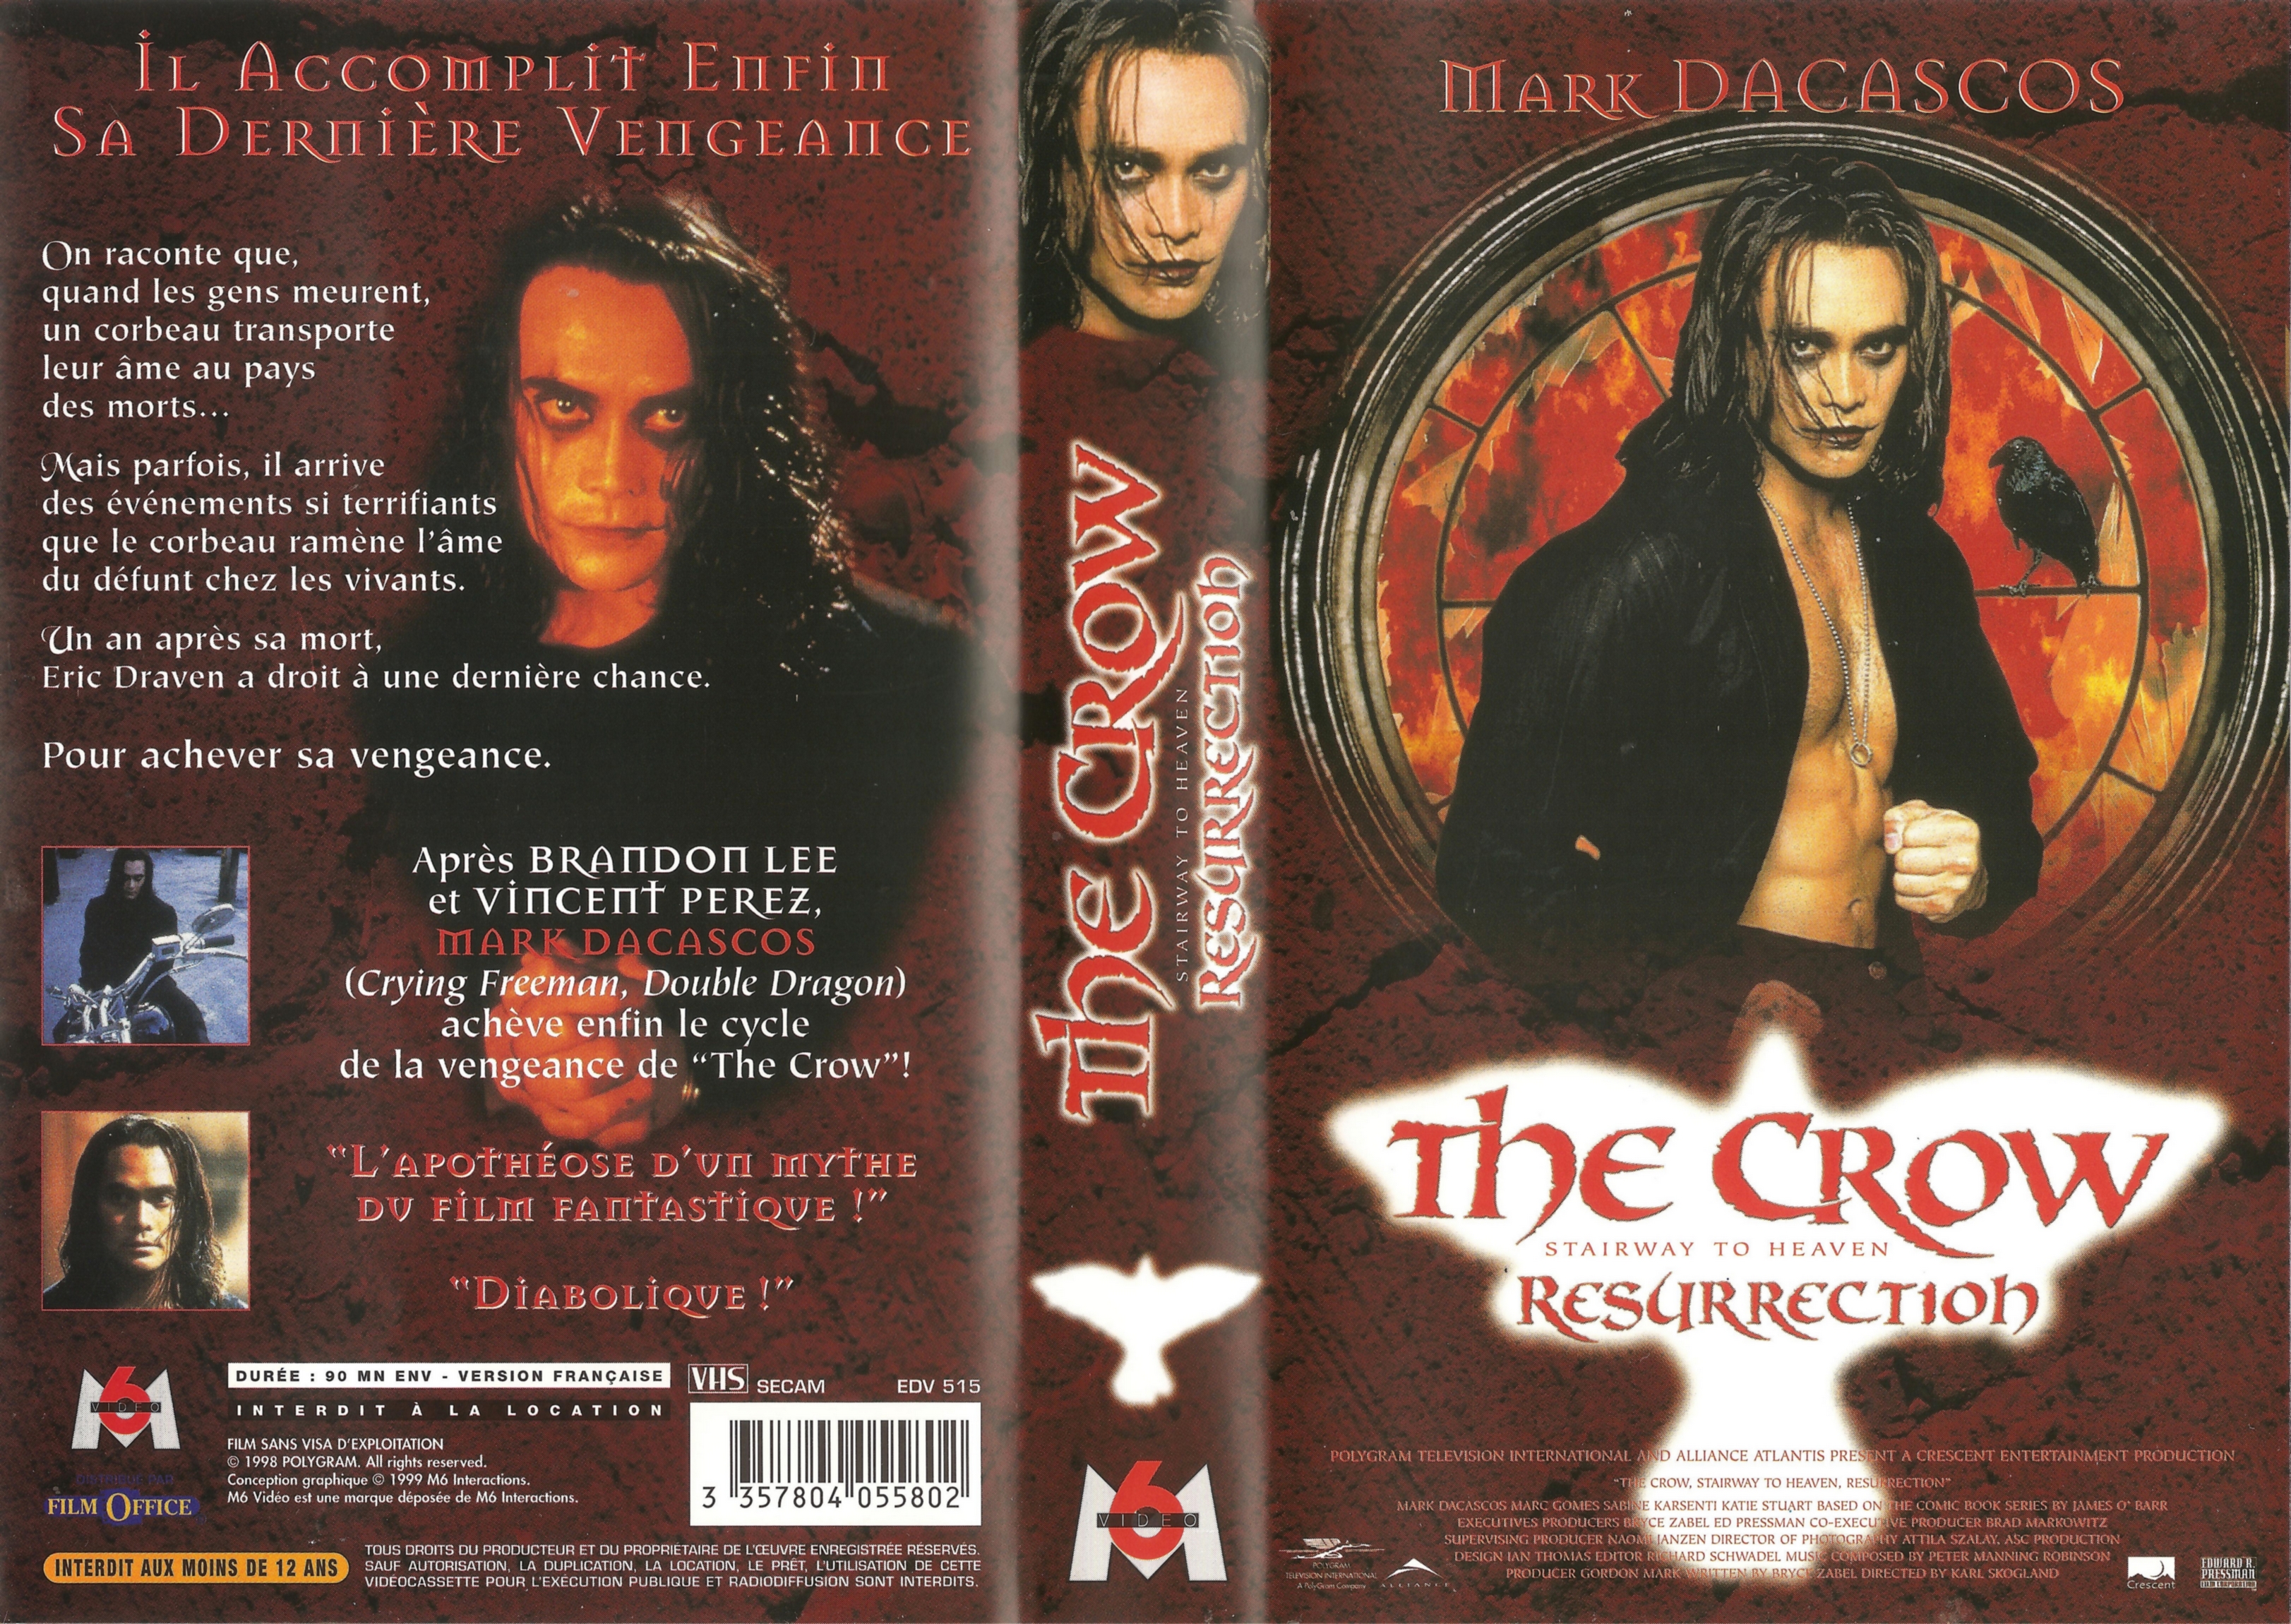 Jaquette DVD The Crow Stairway to Heaven Resurrection